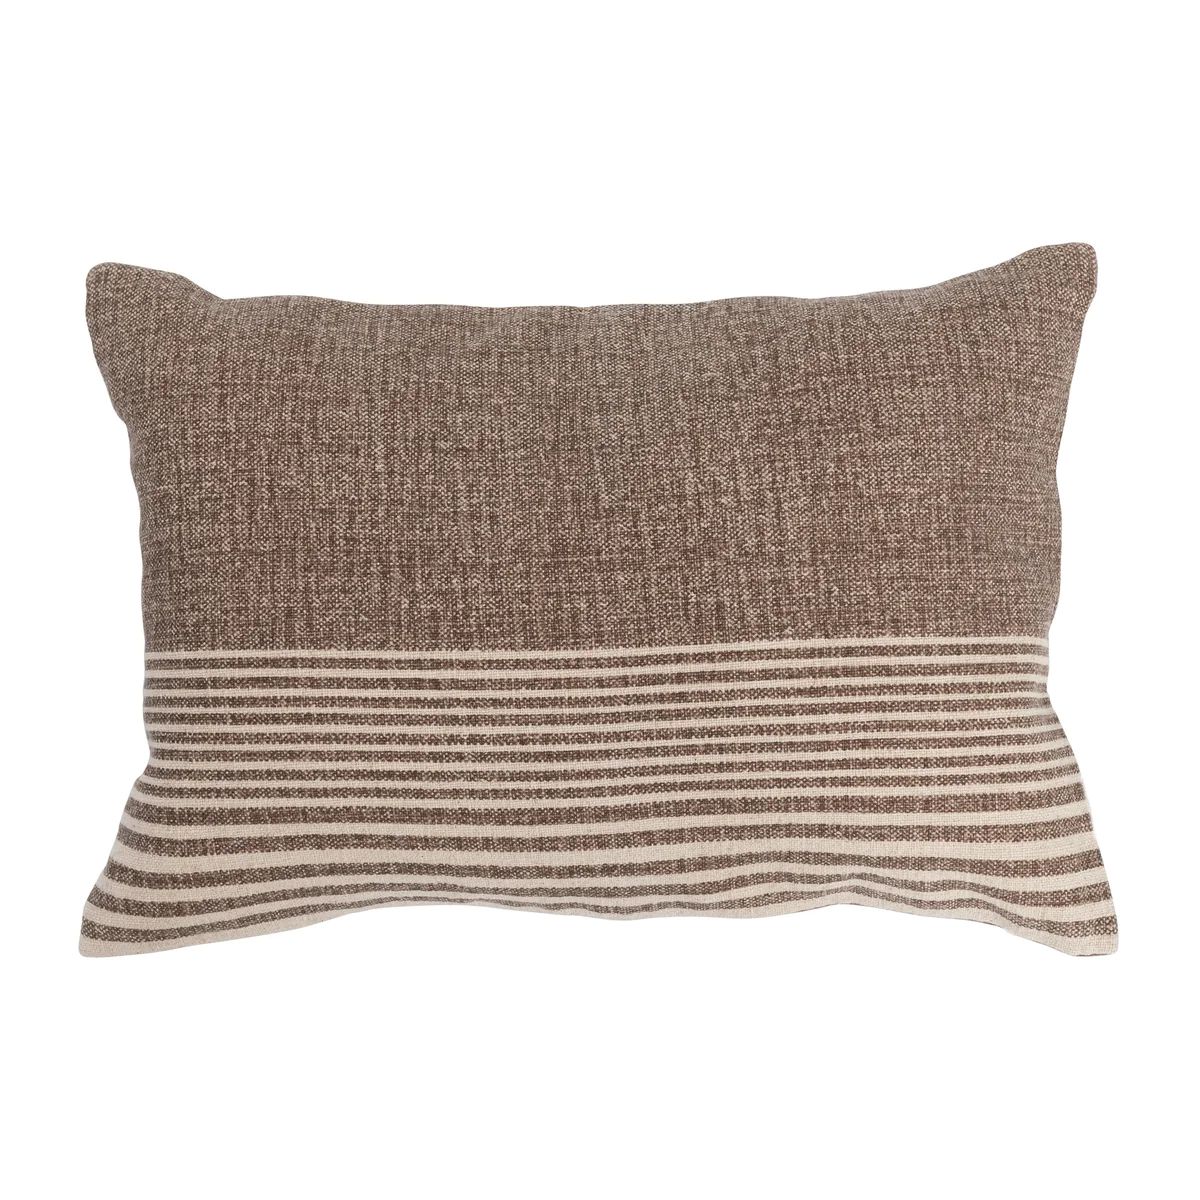 Striped Cotton Blend Slub Pillow with Leather Tab | APIARY by The Busy Bee